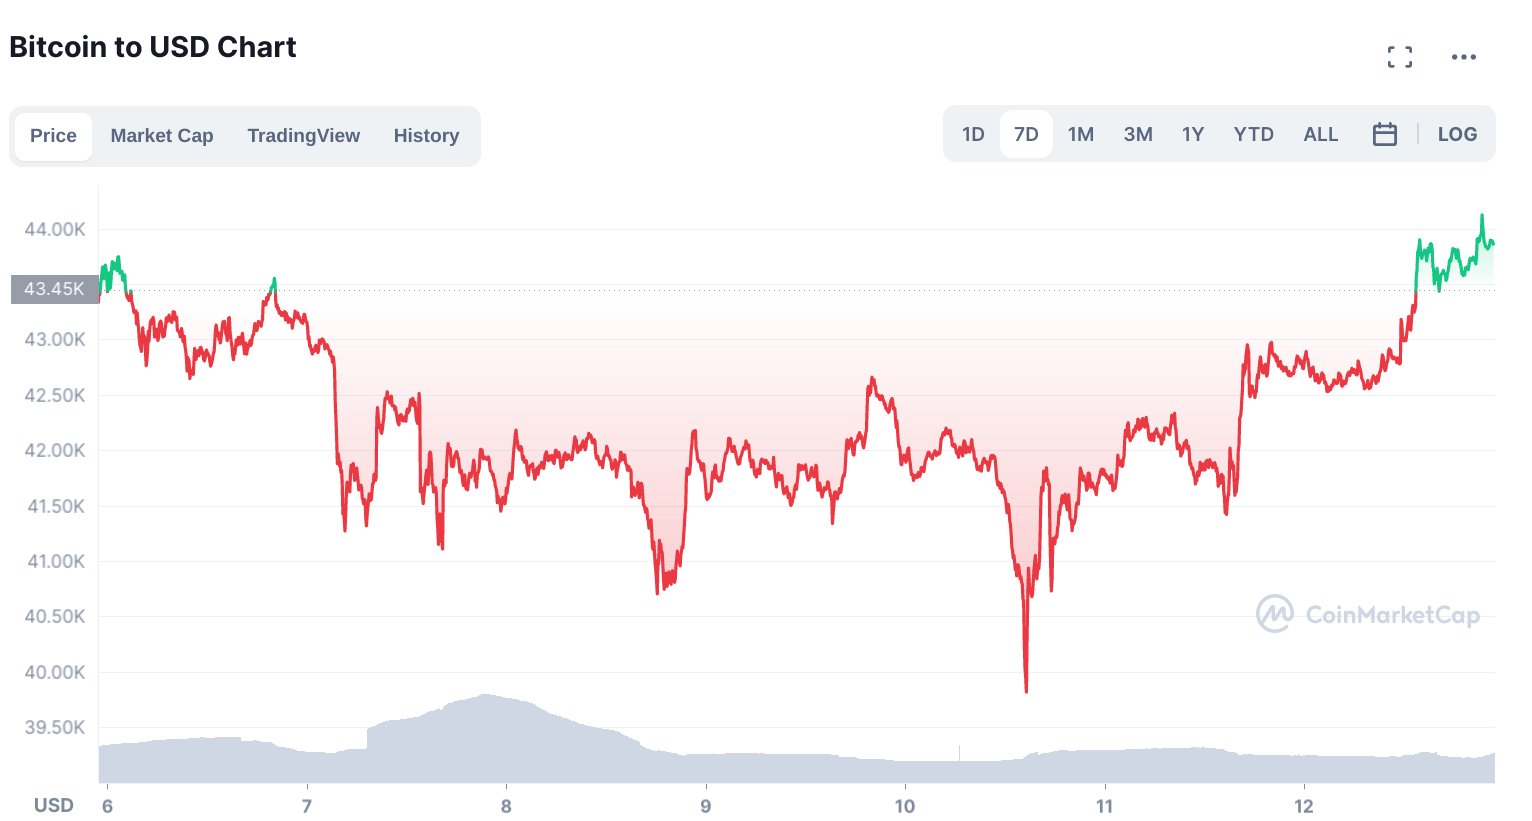 bitcoin price reversing upwards after an extended downtrend.